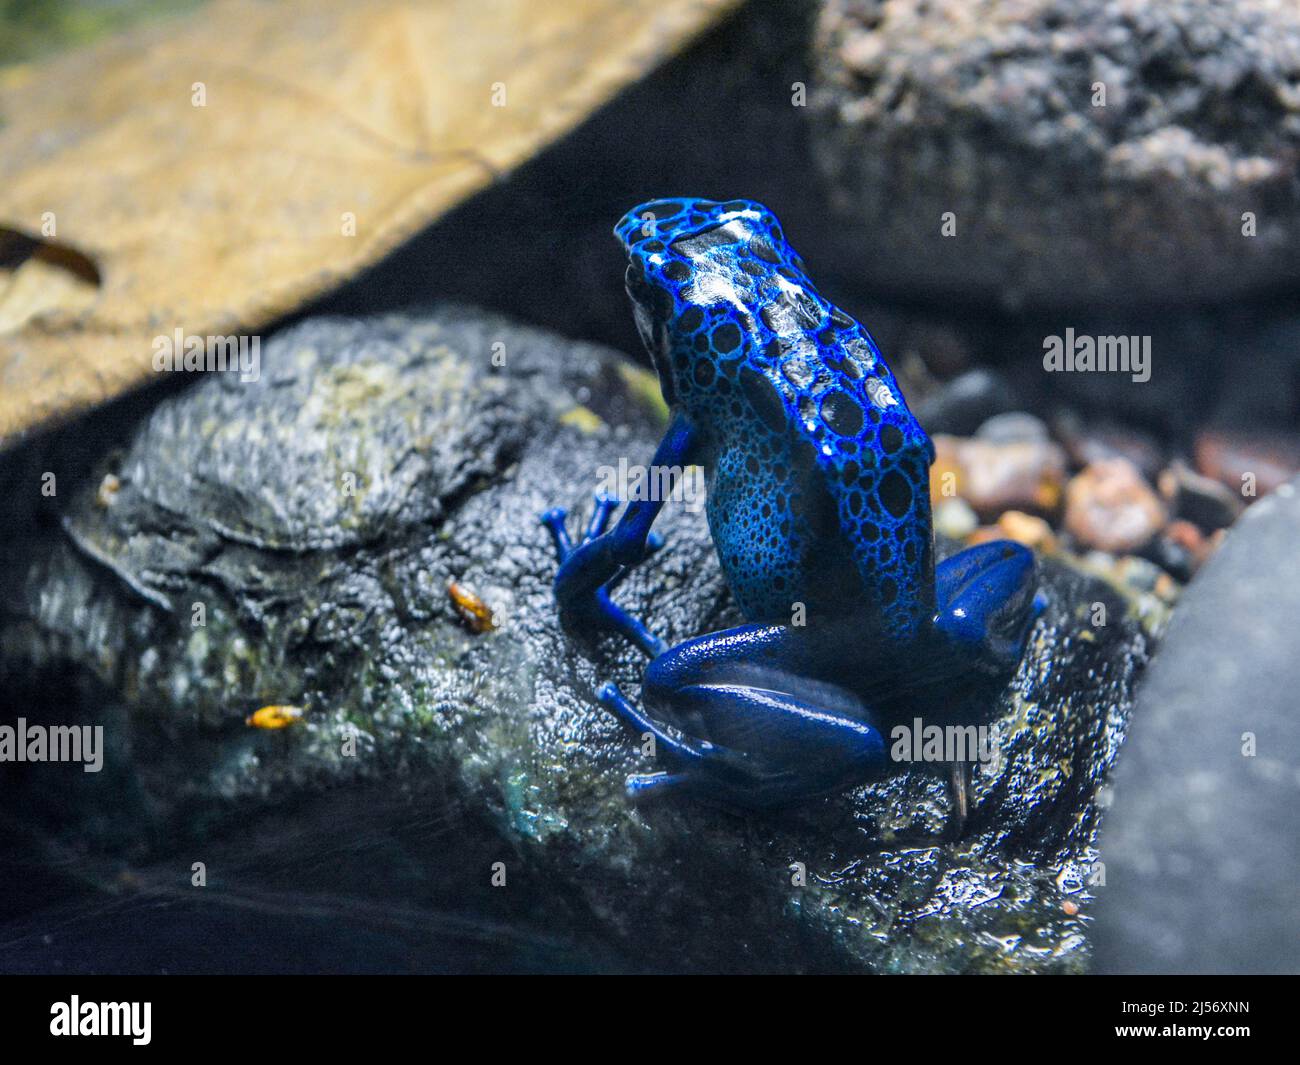 Blue Poison Frog at the Zoo Stock Photo